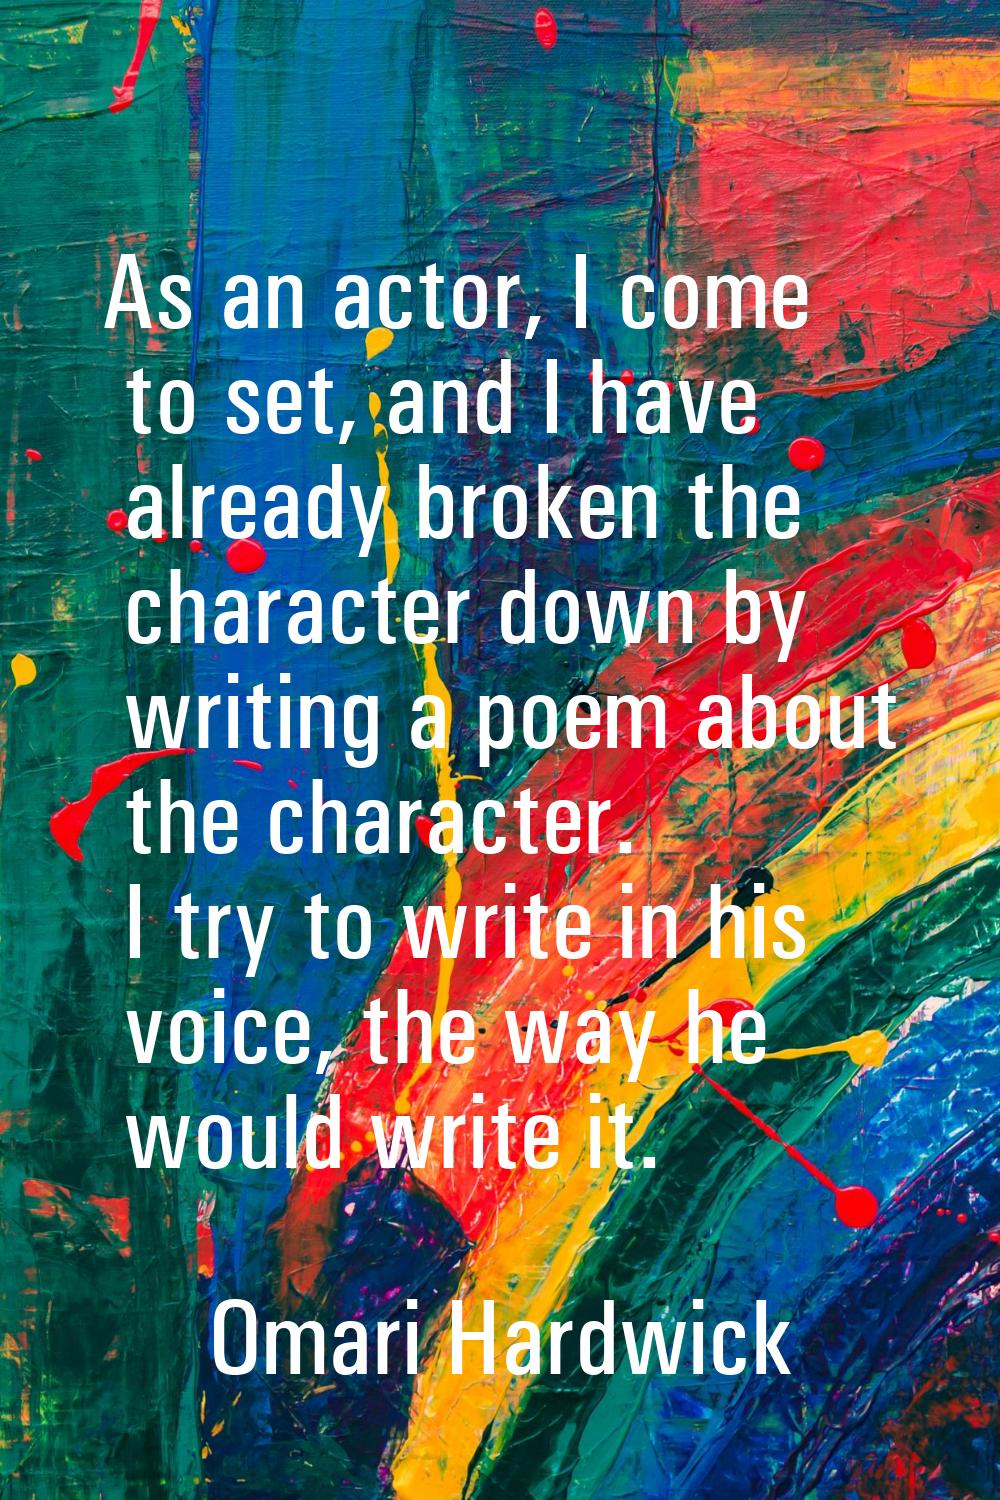 As an actor, I come to set, and I have already broken the character down by writing a poem about th